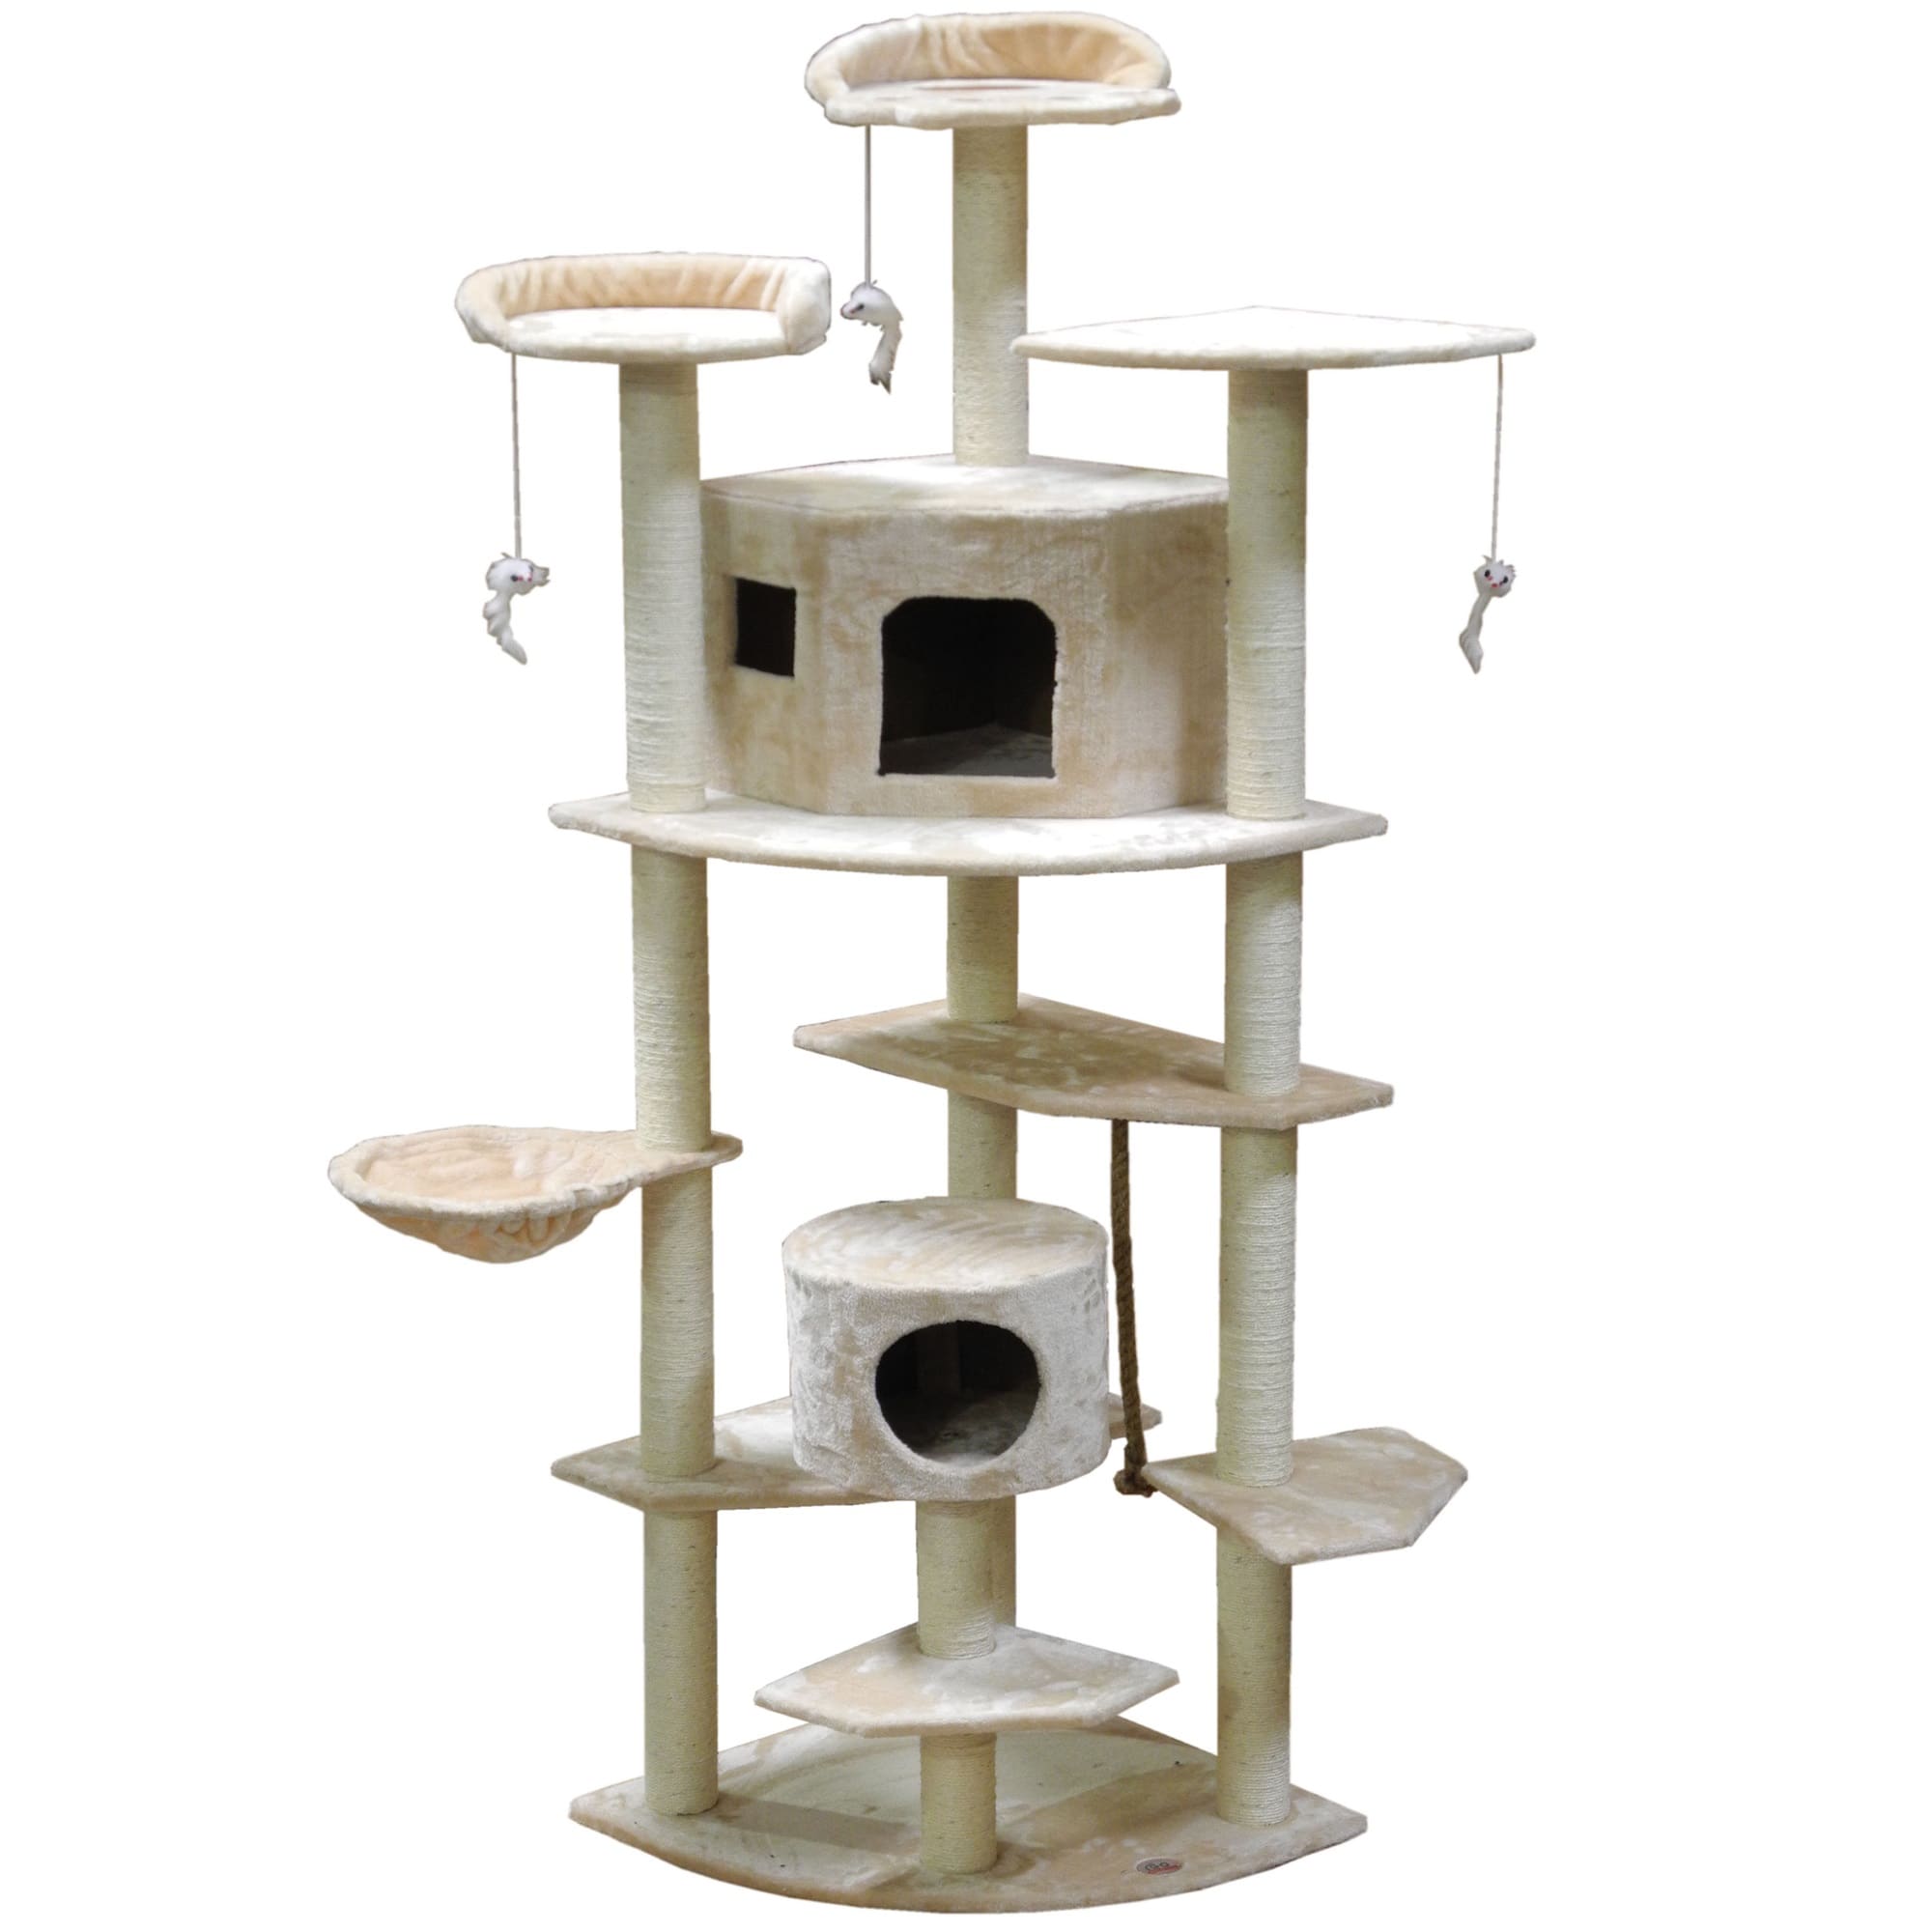 Go Pet Club Classic Beige Cat Tree House Furniture with Sisal Scratching Post